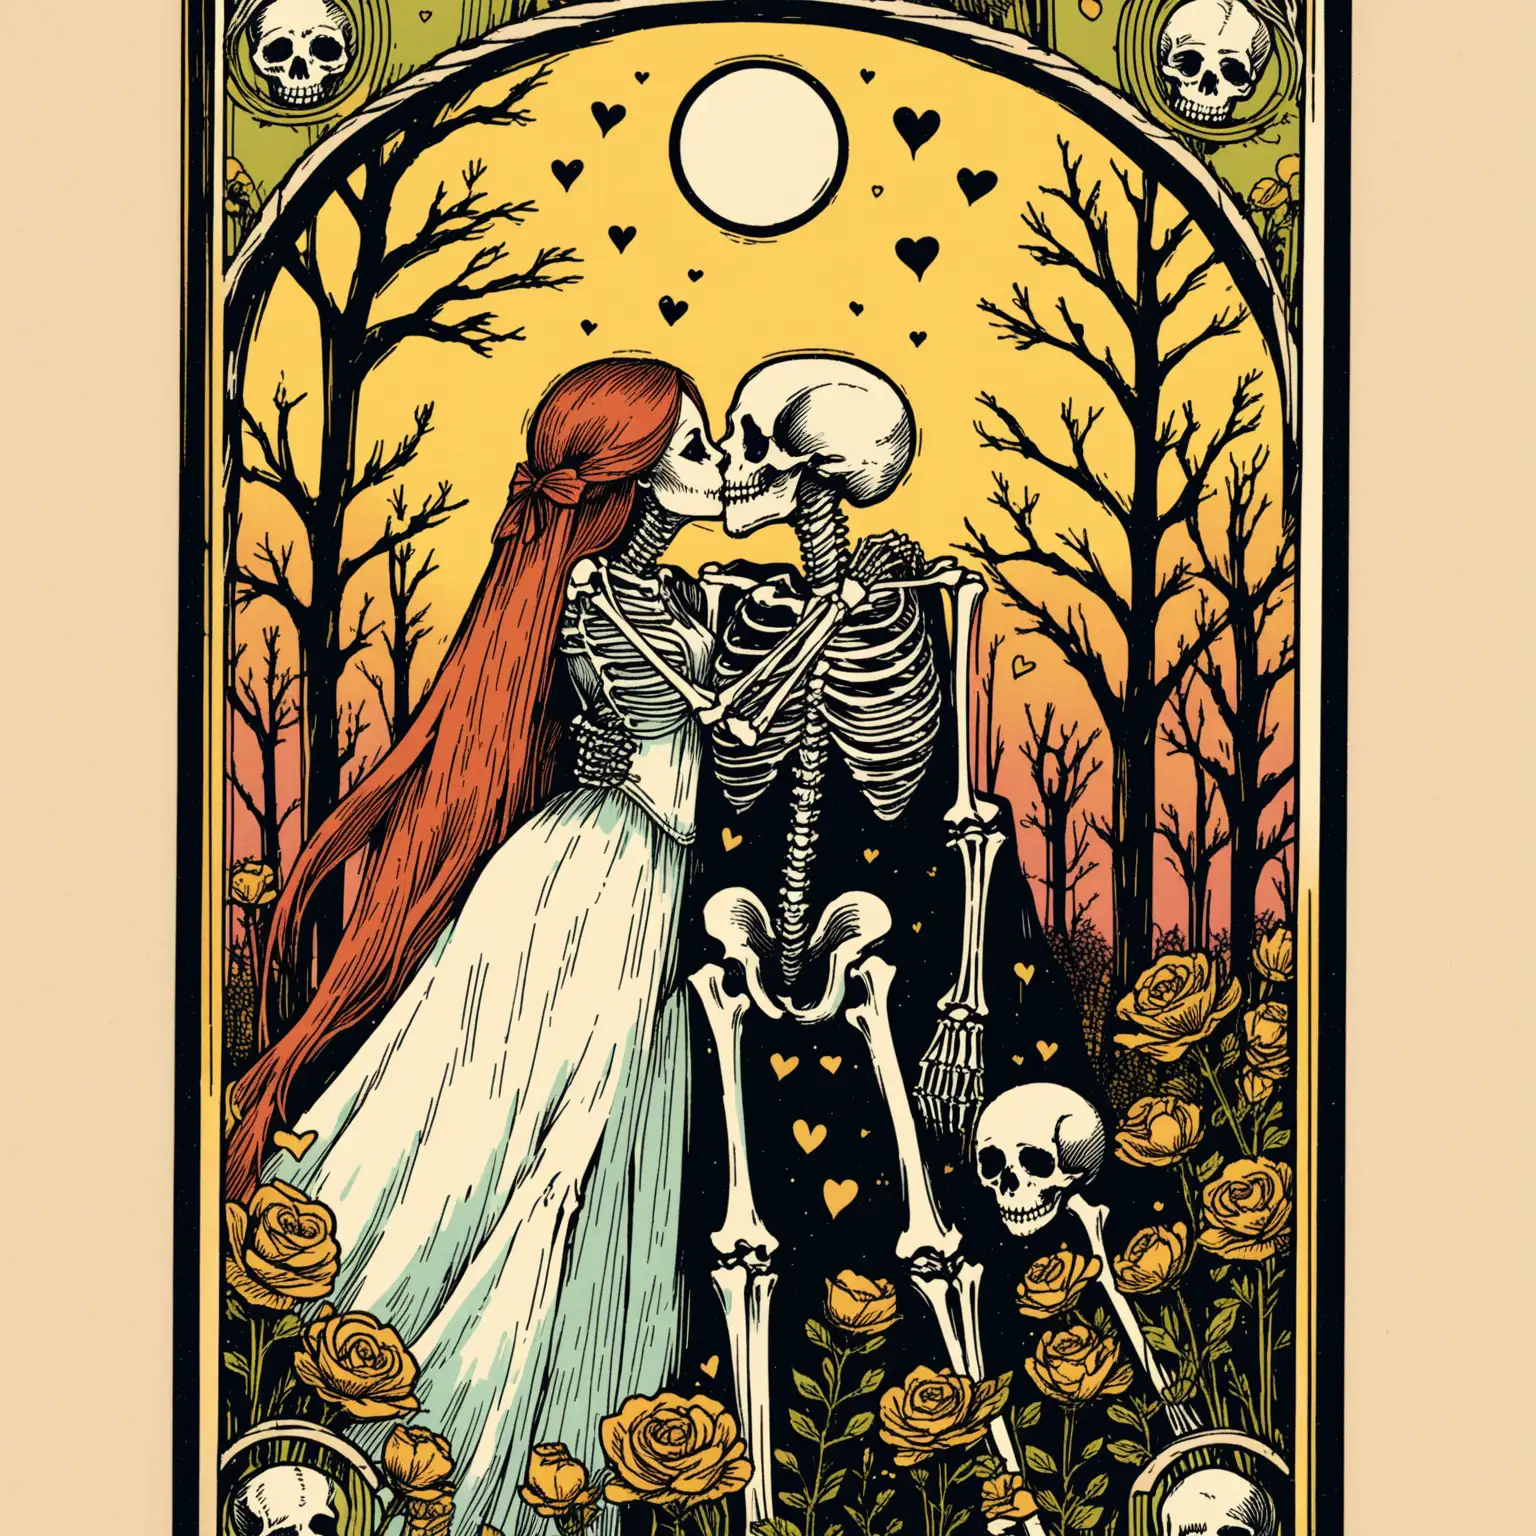 Romantic Lovers Tarot Card with Kissing Skeletons